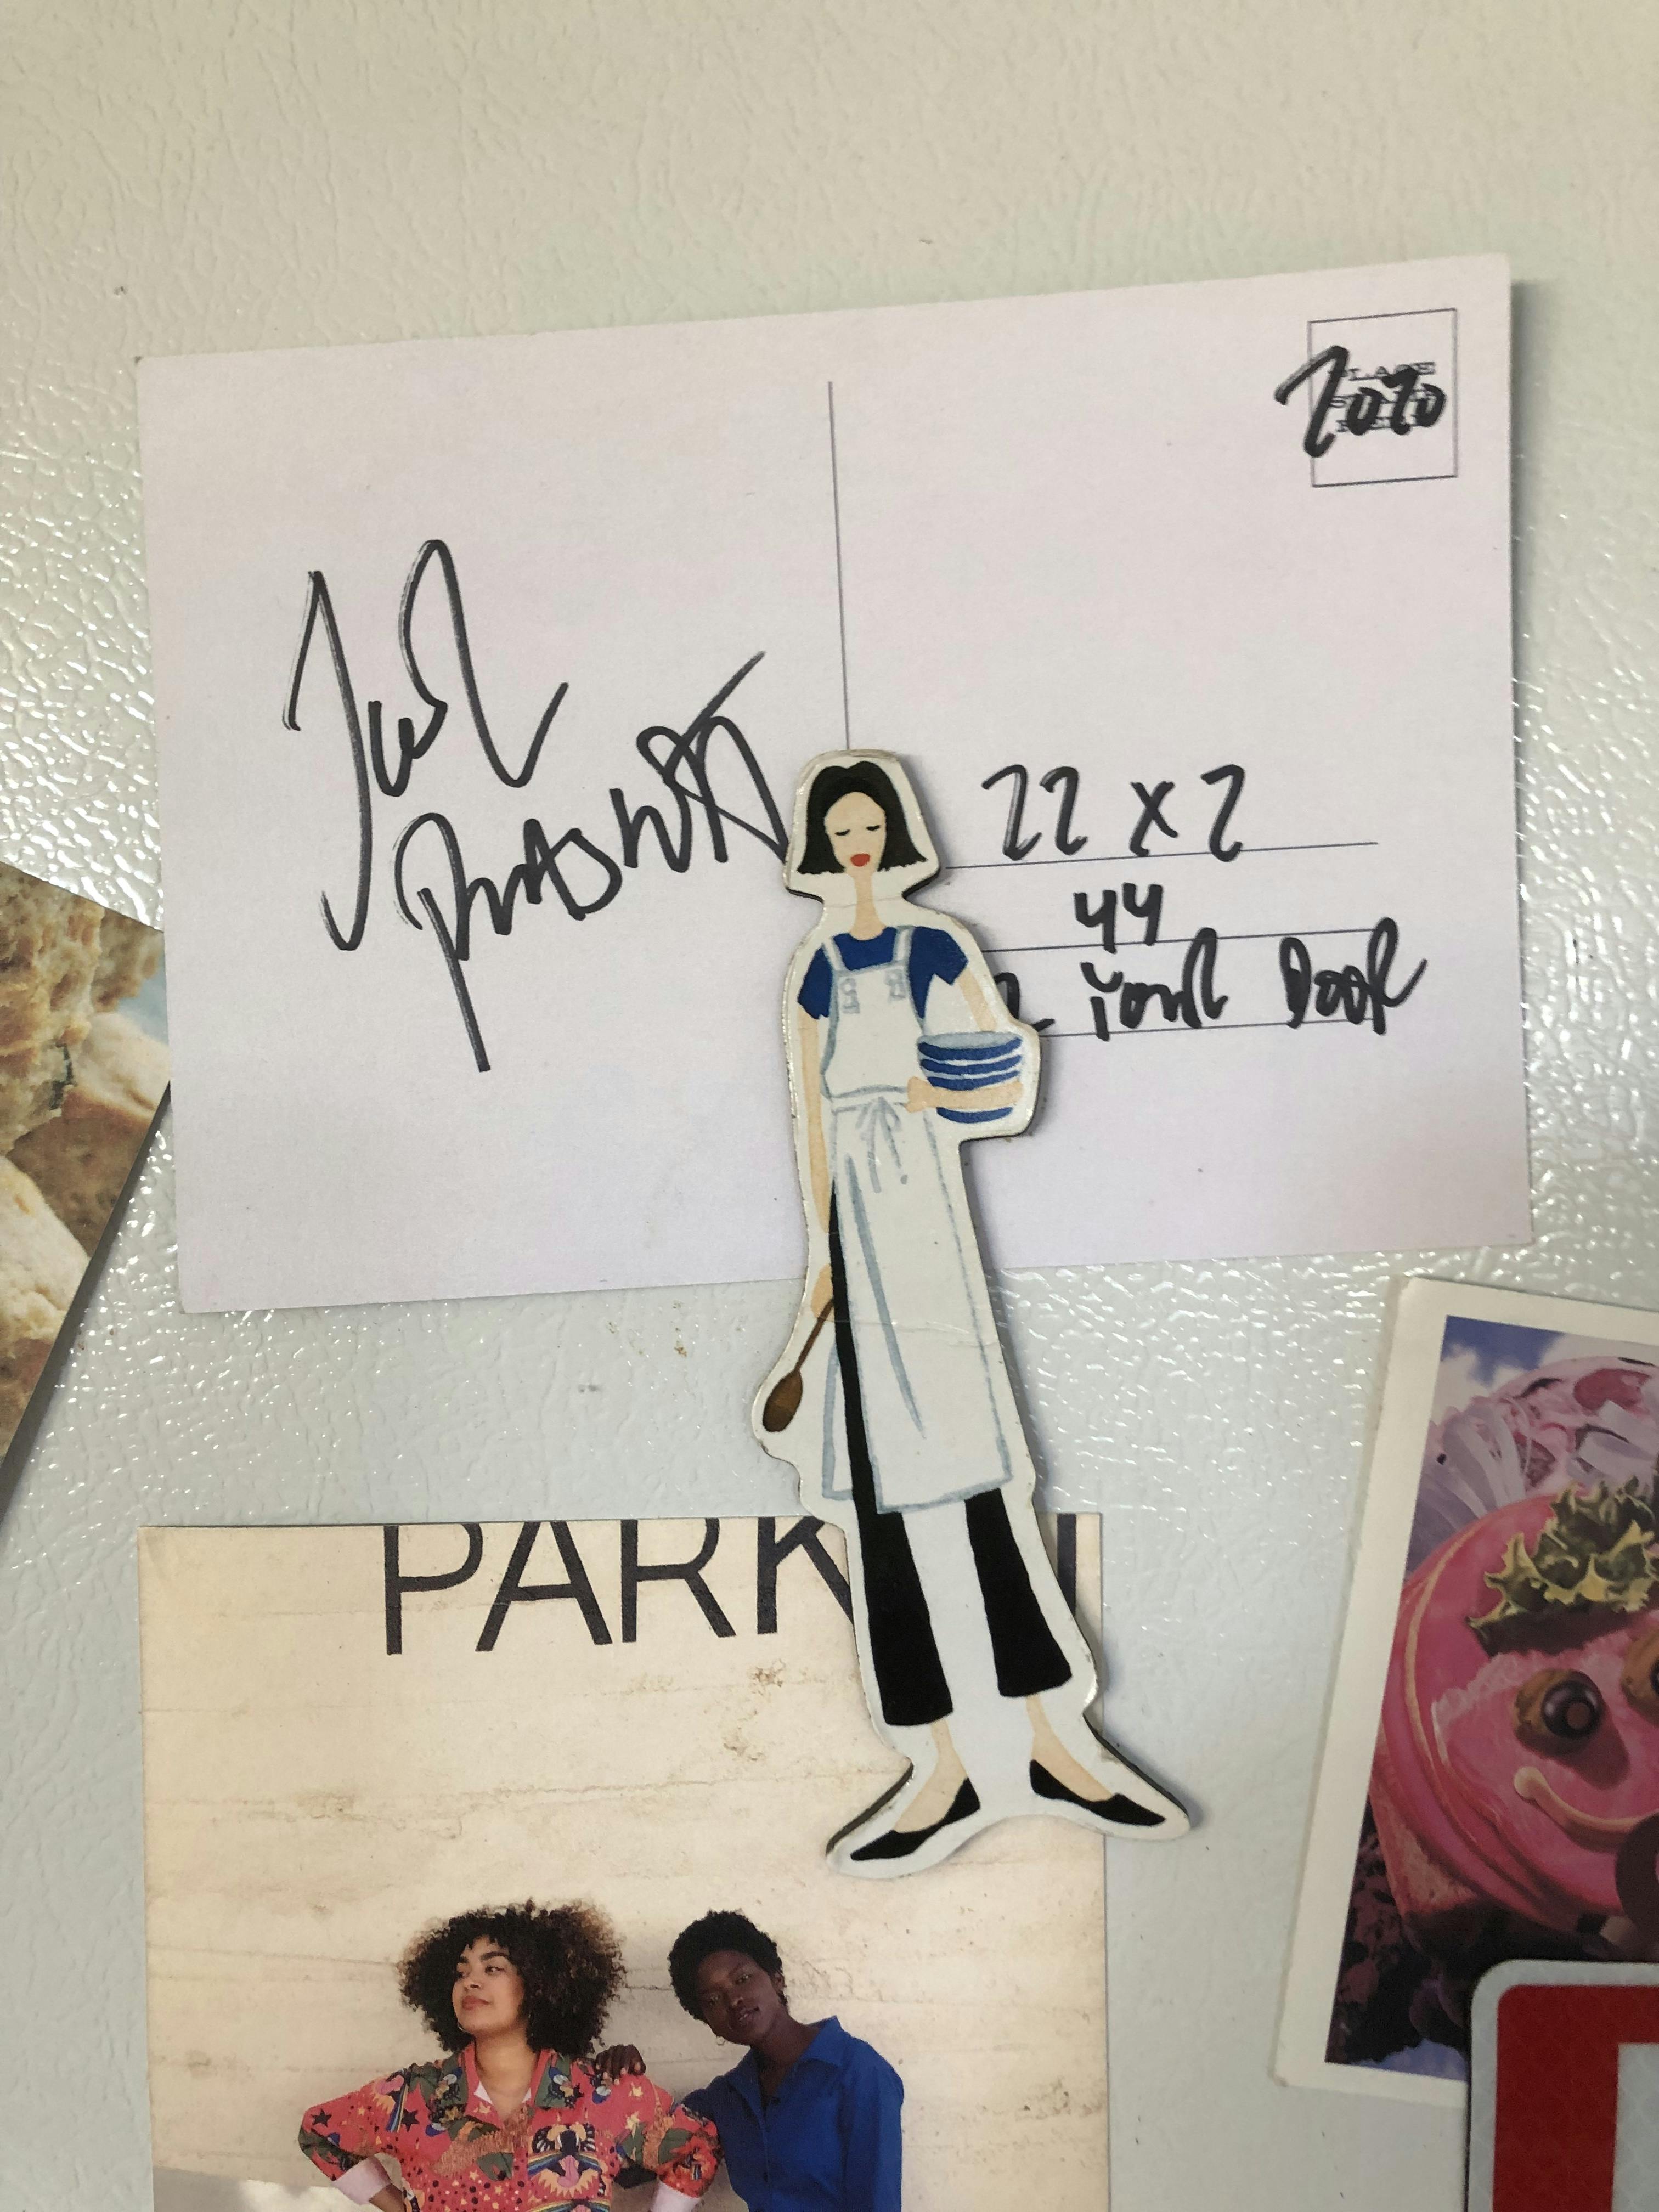 postcard with Joel Plaskett's autograph magneted to a white fridge with a magnet of a baker and other postcards surrounding it